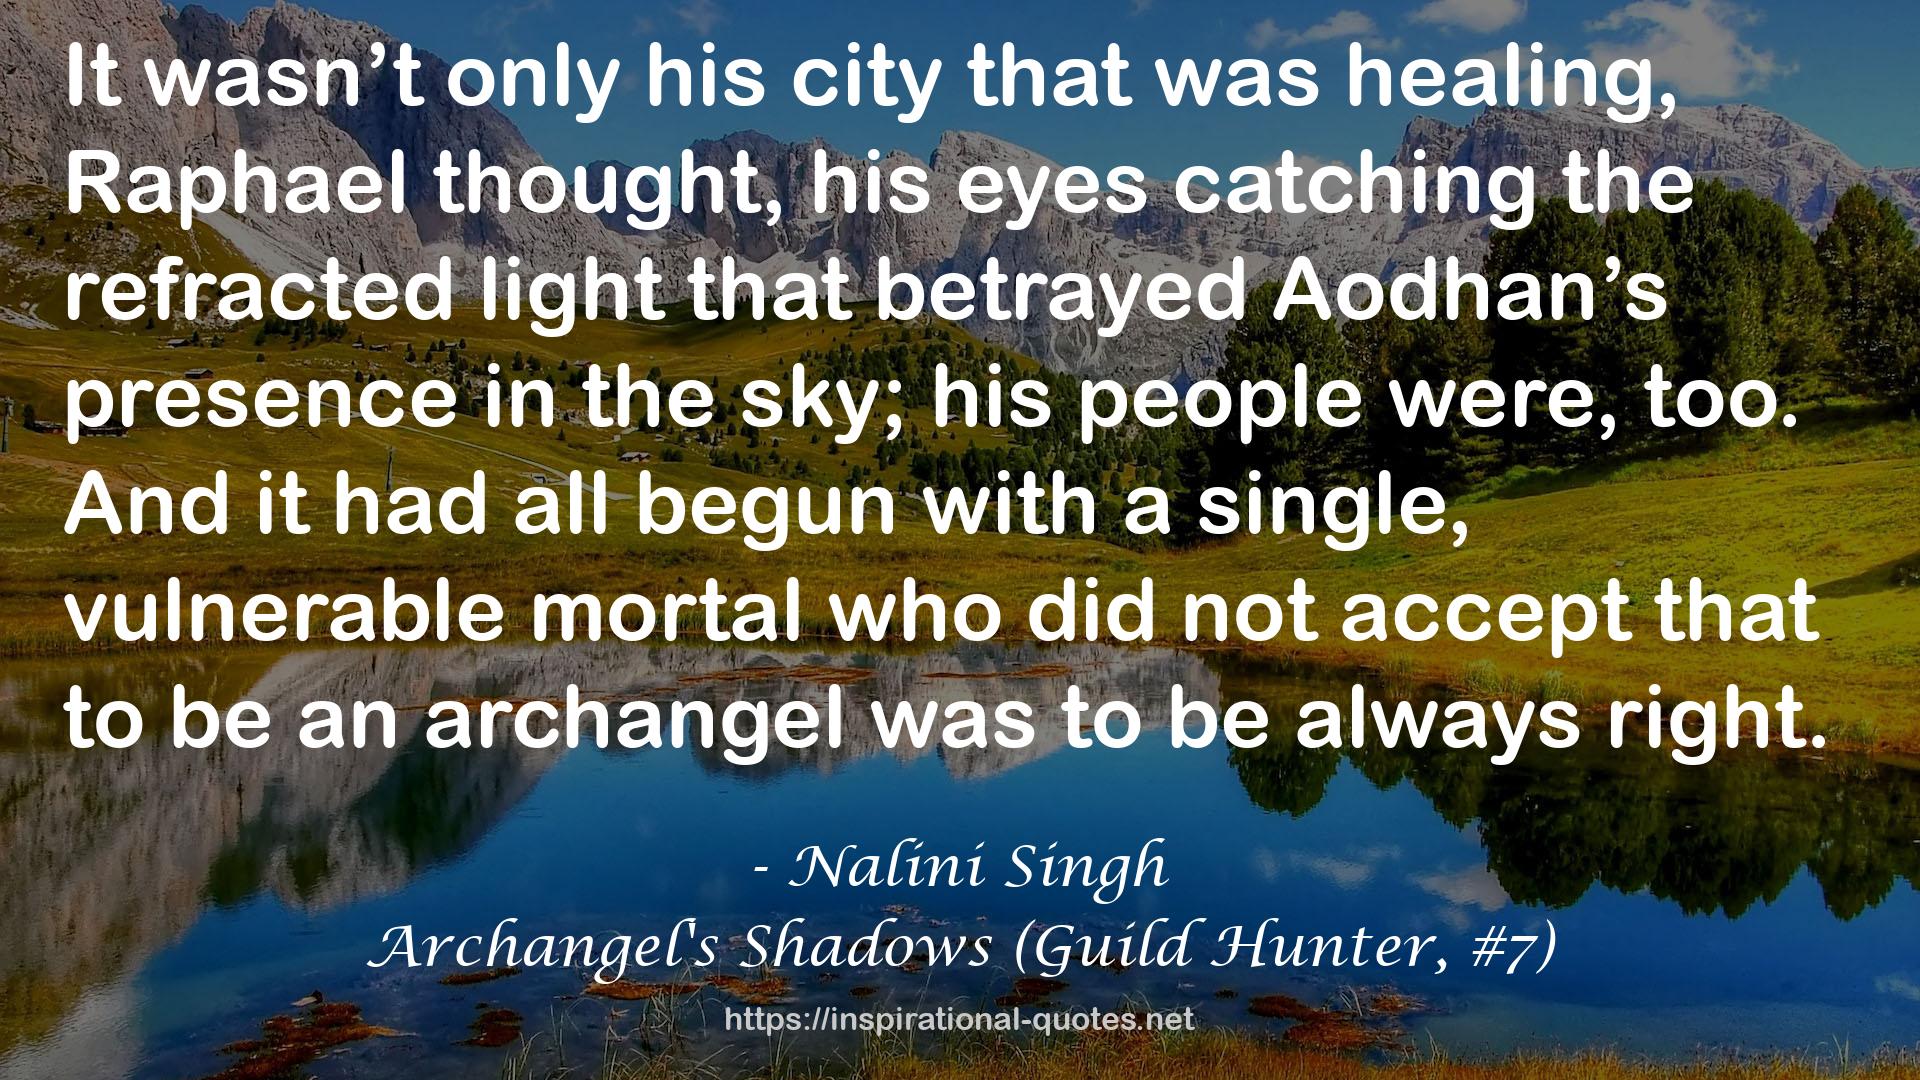 Archangel's Shadows (Guild Hunter, #7) QUOTES